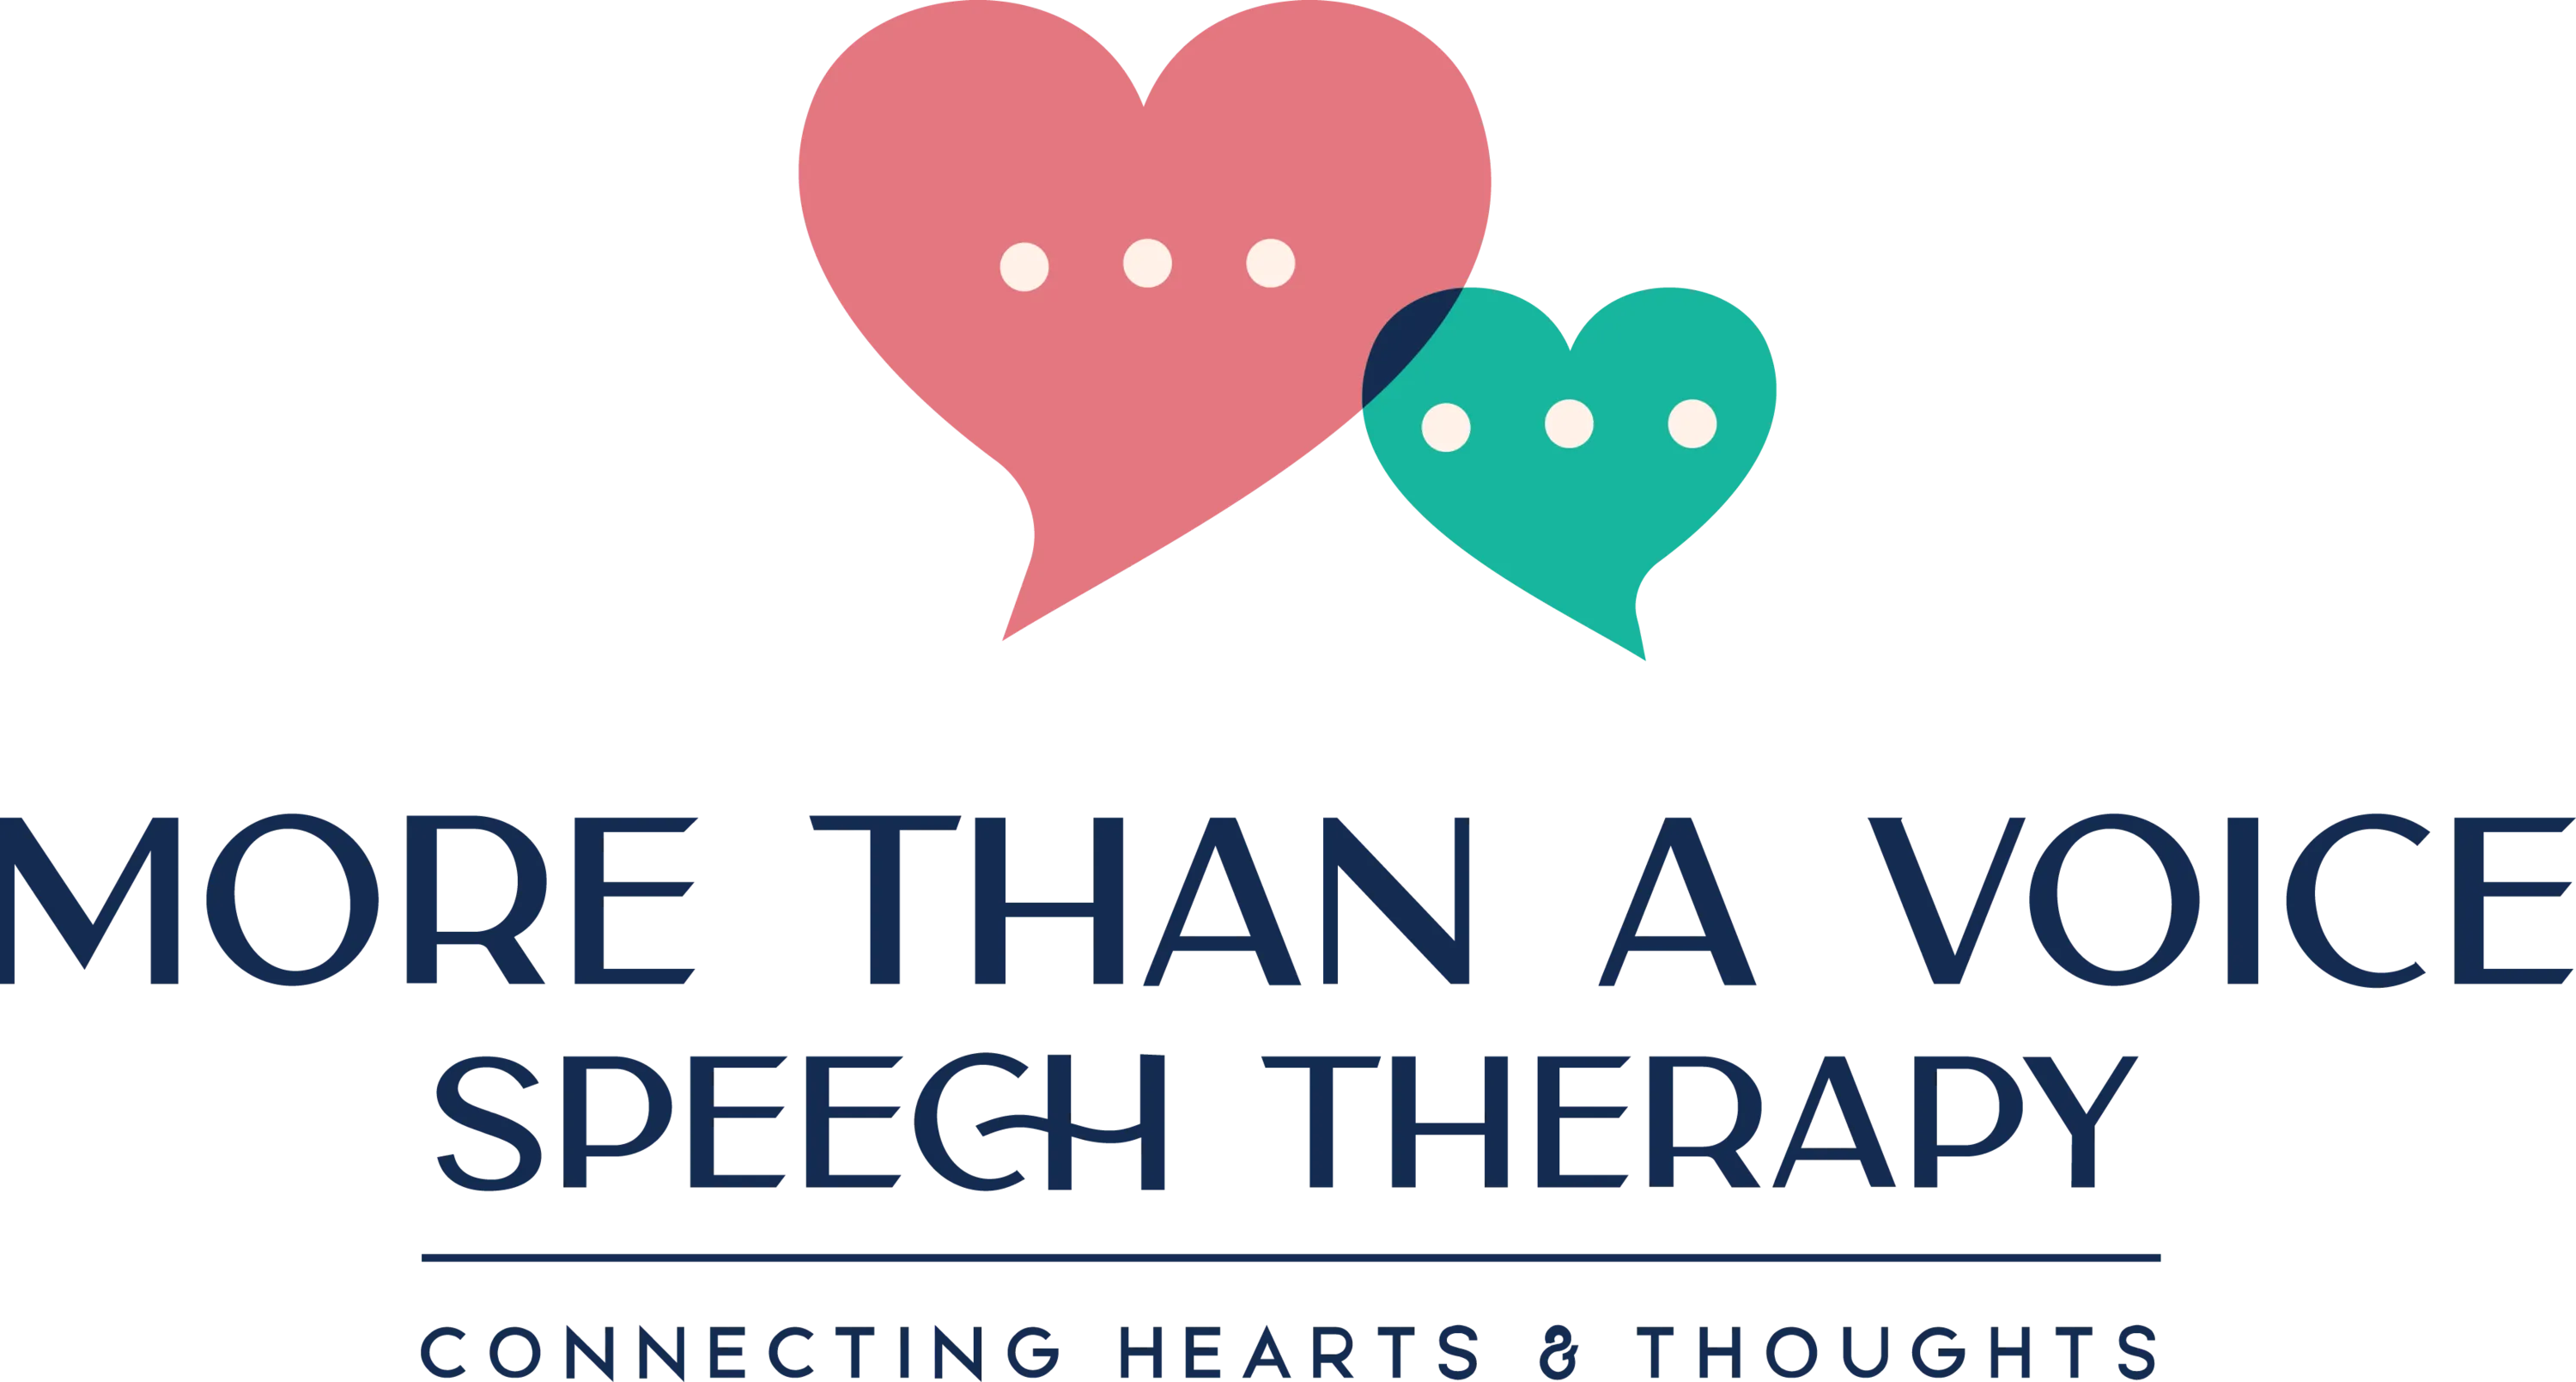 More Than A Voice Speech Therapy